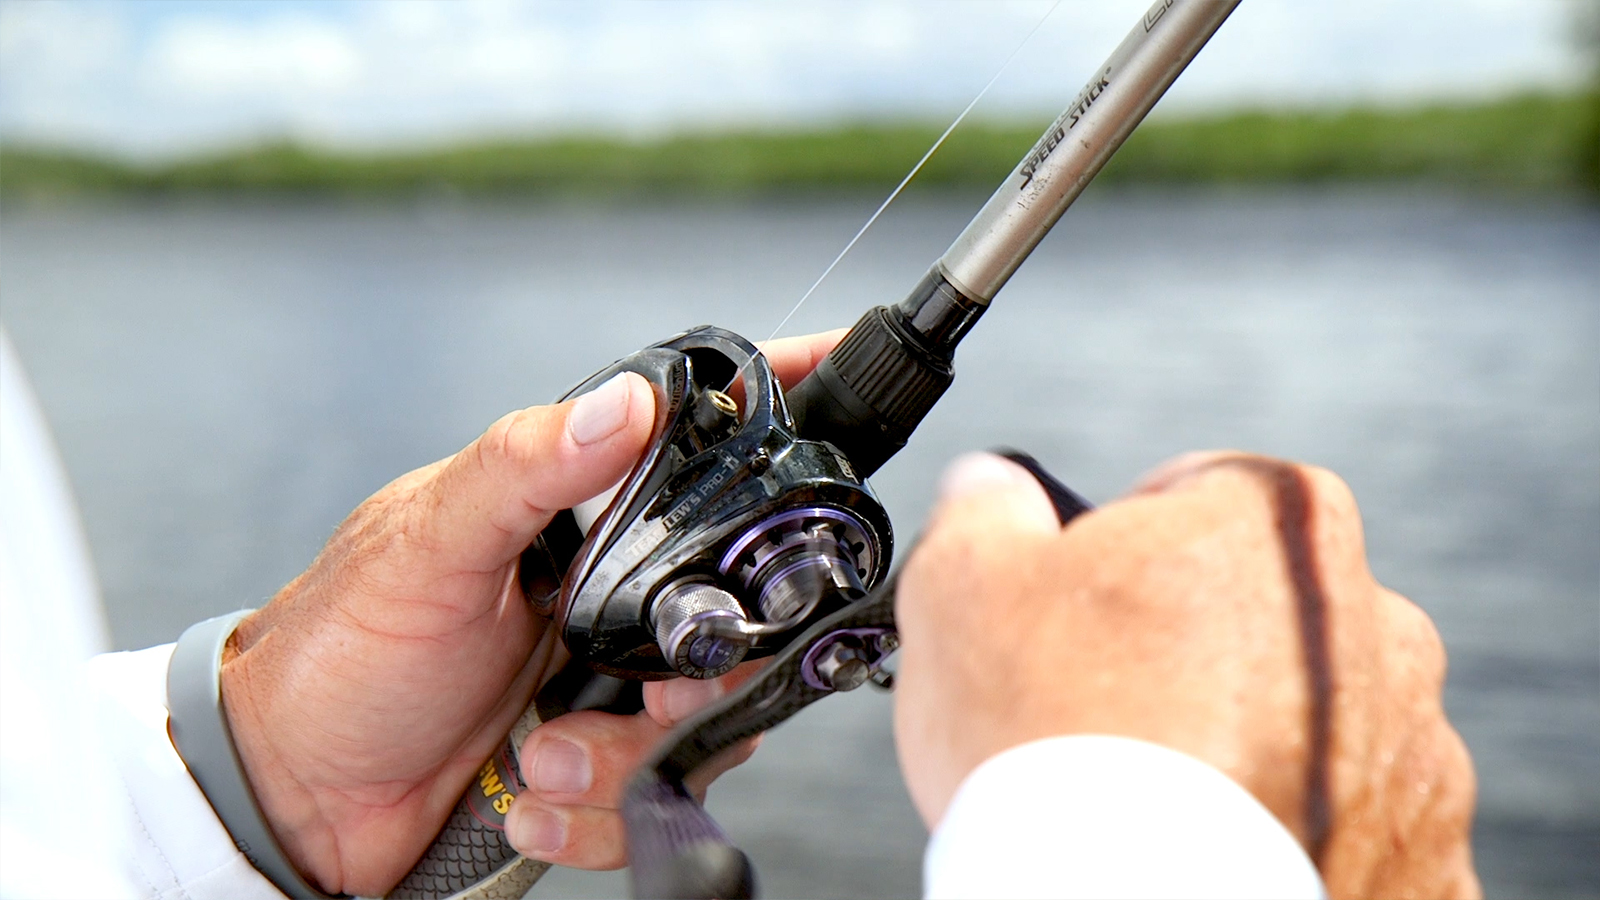 Jeff Sprague on Using a 'Universal' Rod for Multiple Year-Around  Applications - Major League Fishing